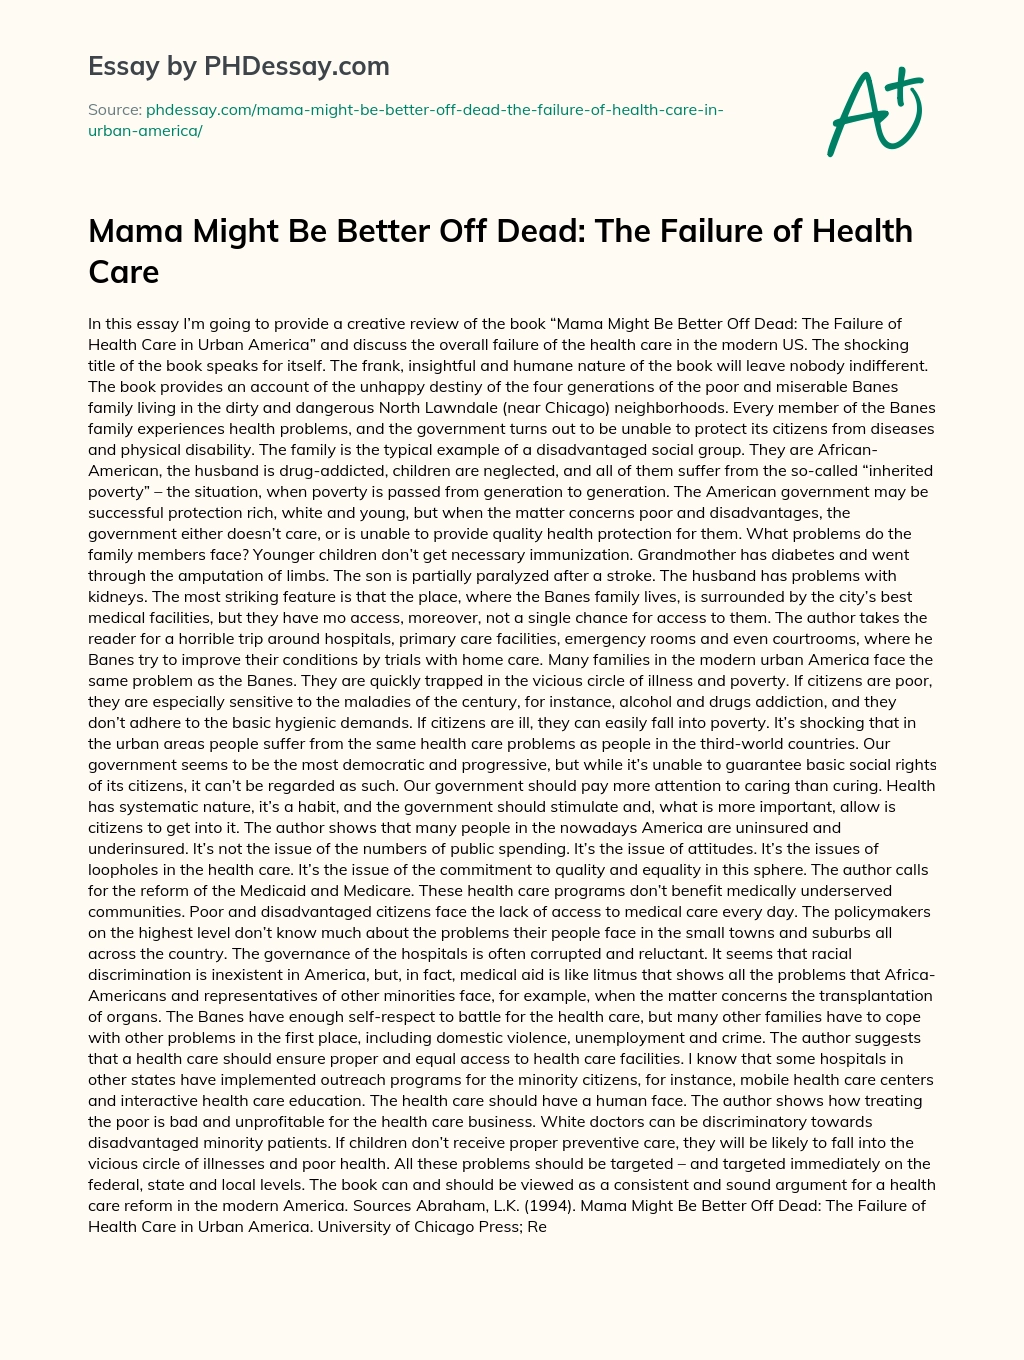 Mama Might Be Better Off Dead: The Failure of Health Care essay